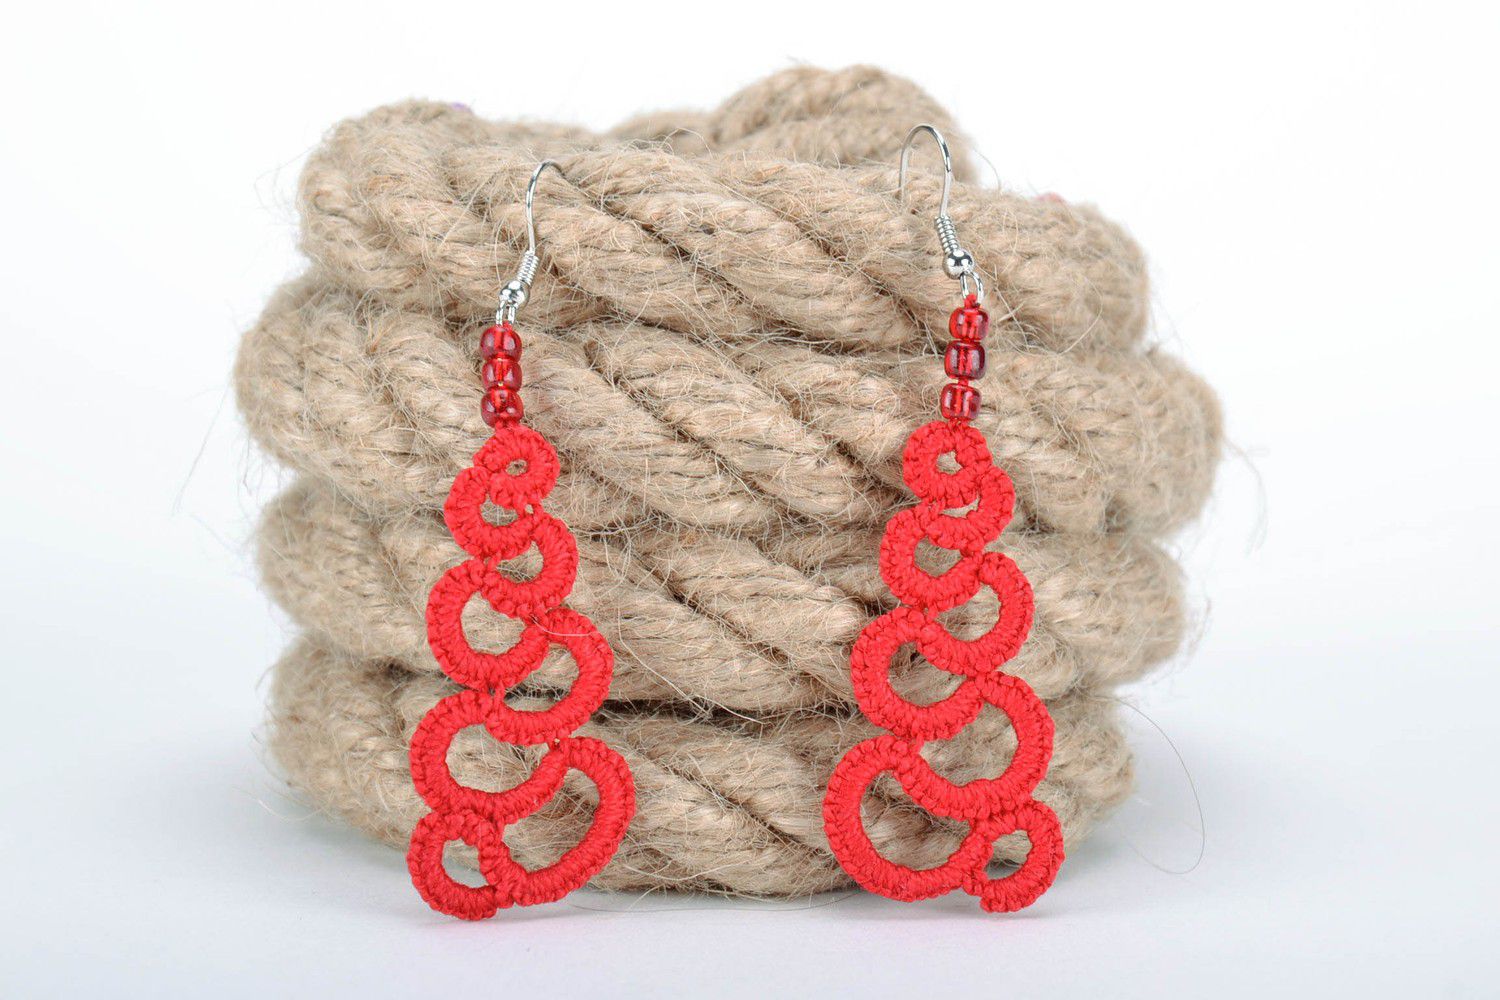 Scarlet earrings made from woven lace photo 1